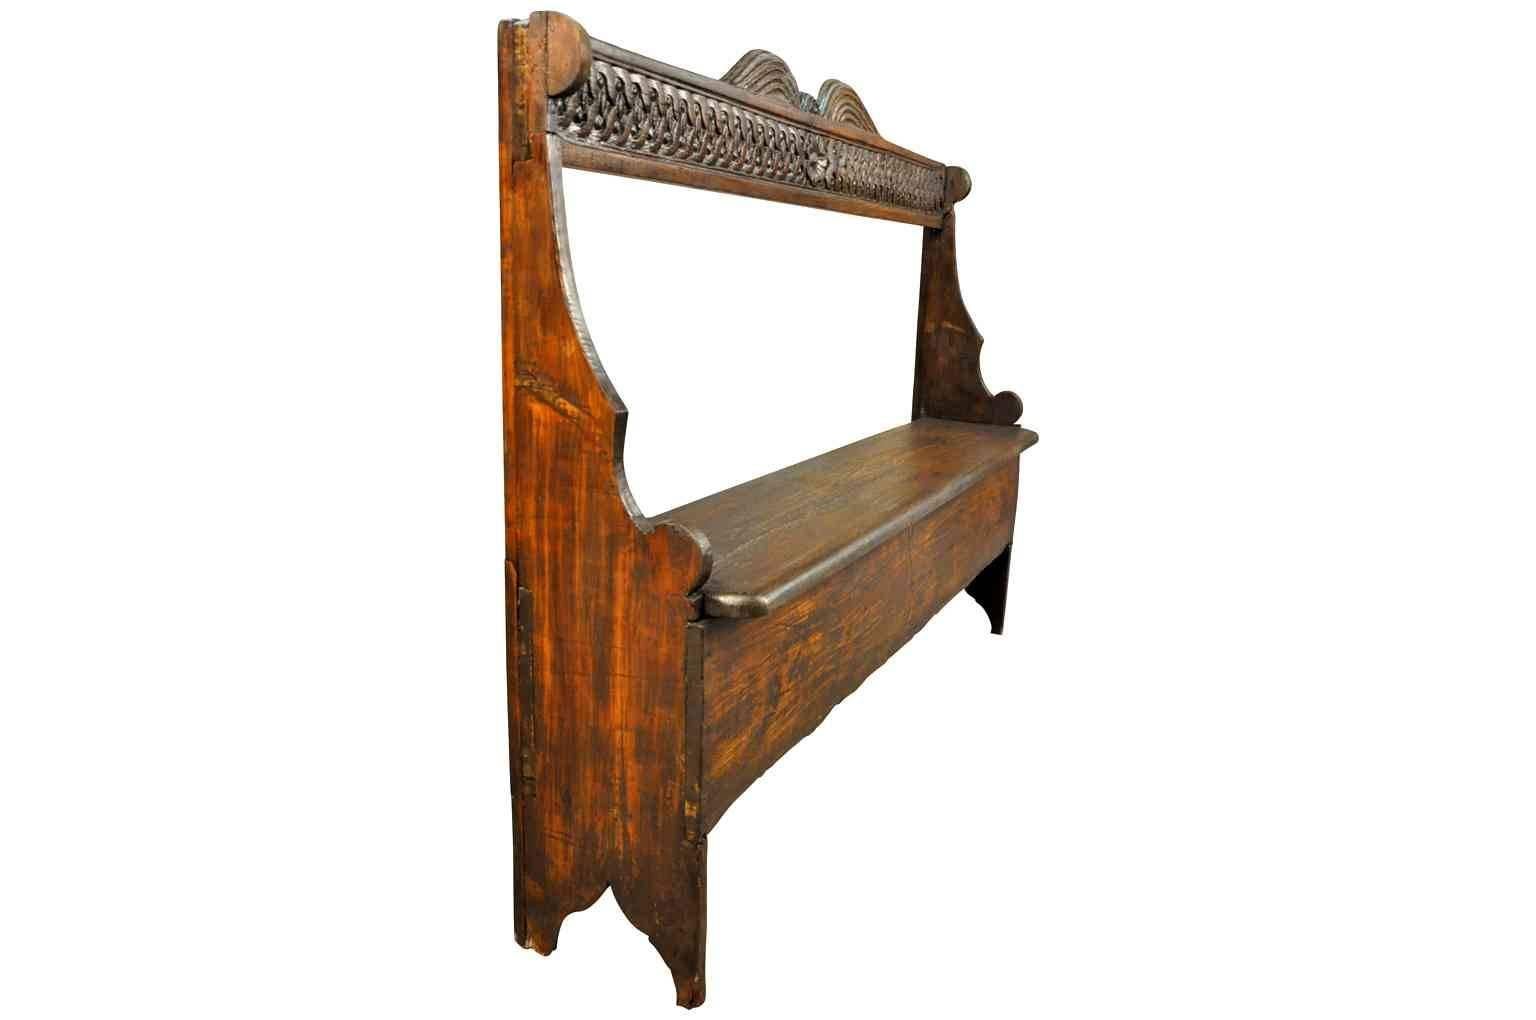 Portuguese Early 19th Century Settle Bench from Portugal